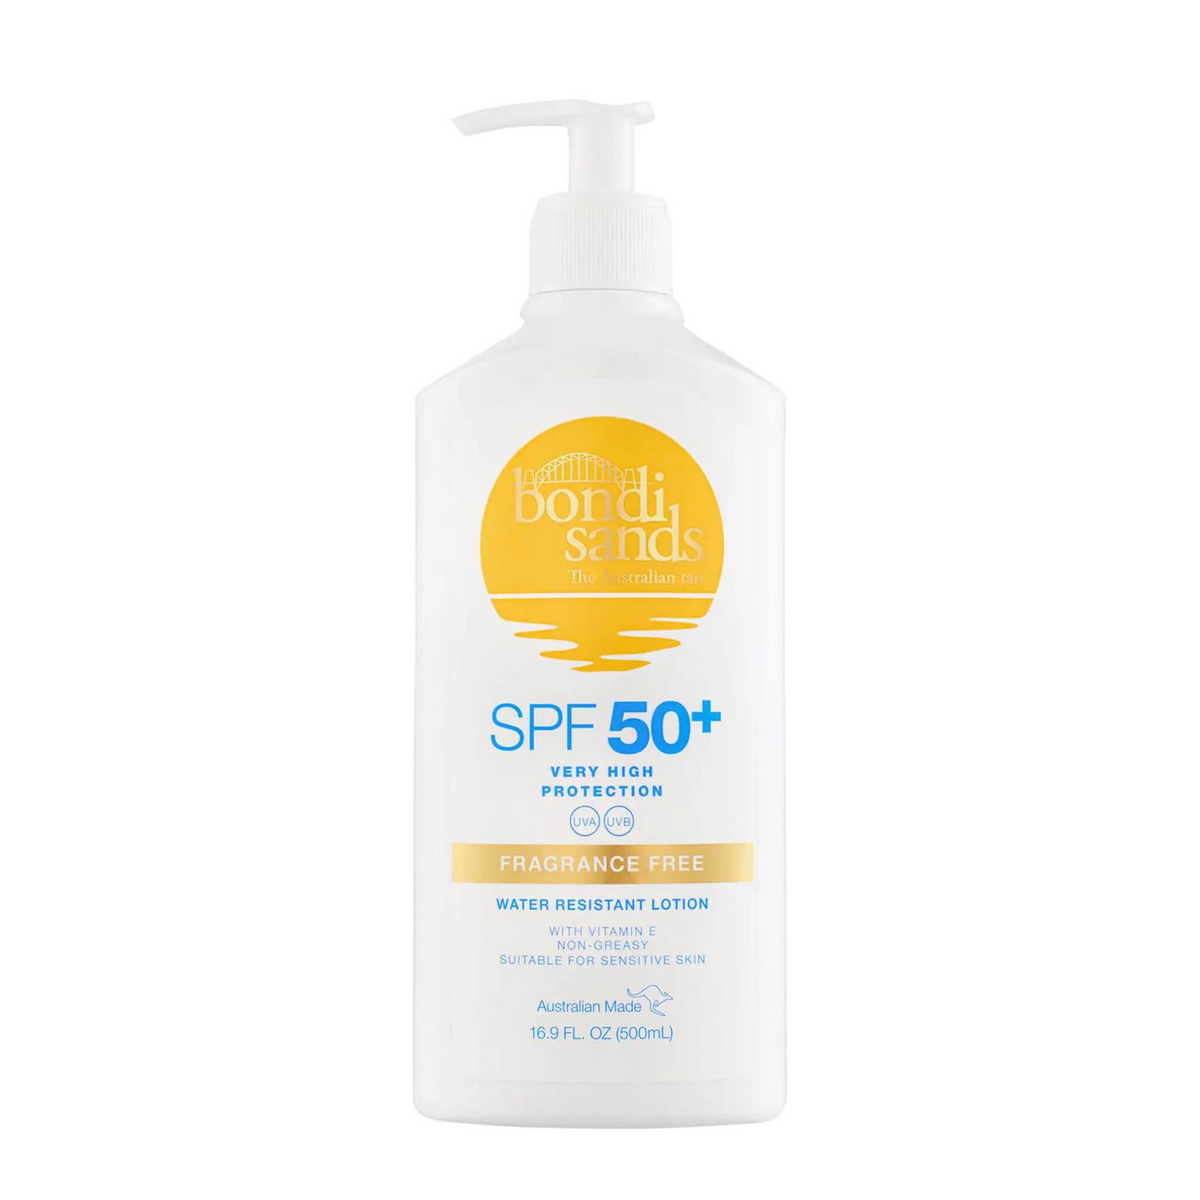 SPF 50+ Fragrance Free Sunscreen Lotion Pump Pack